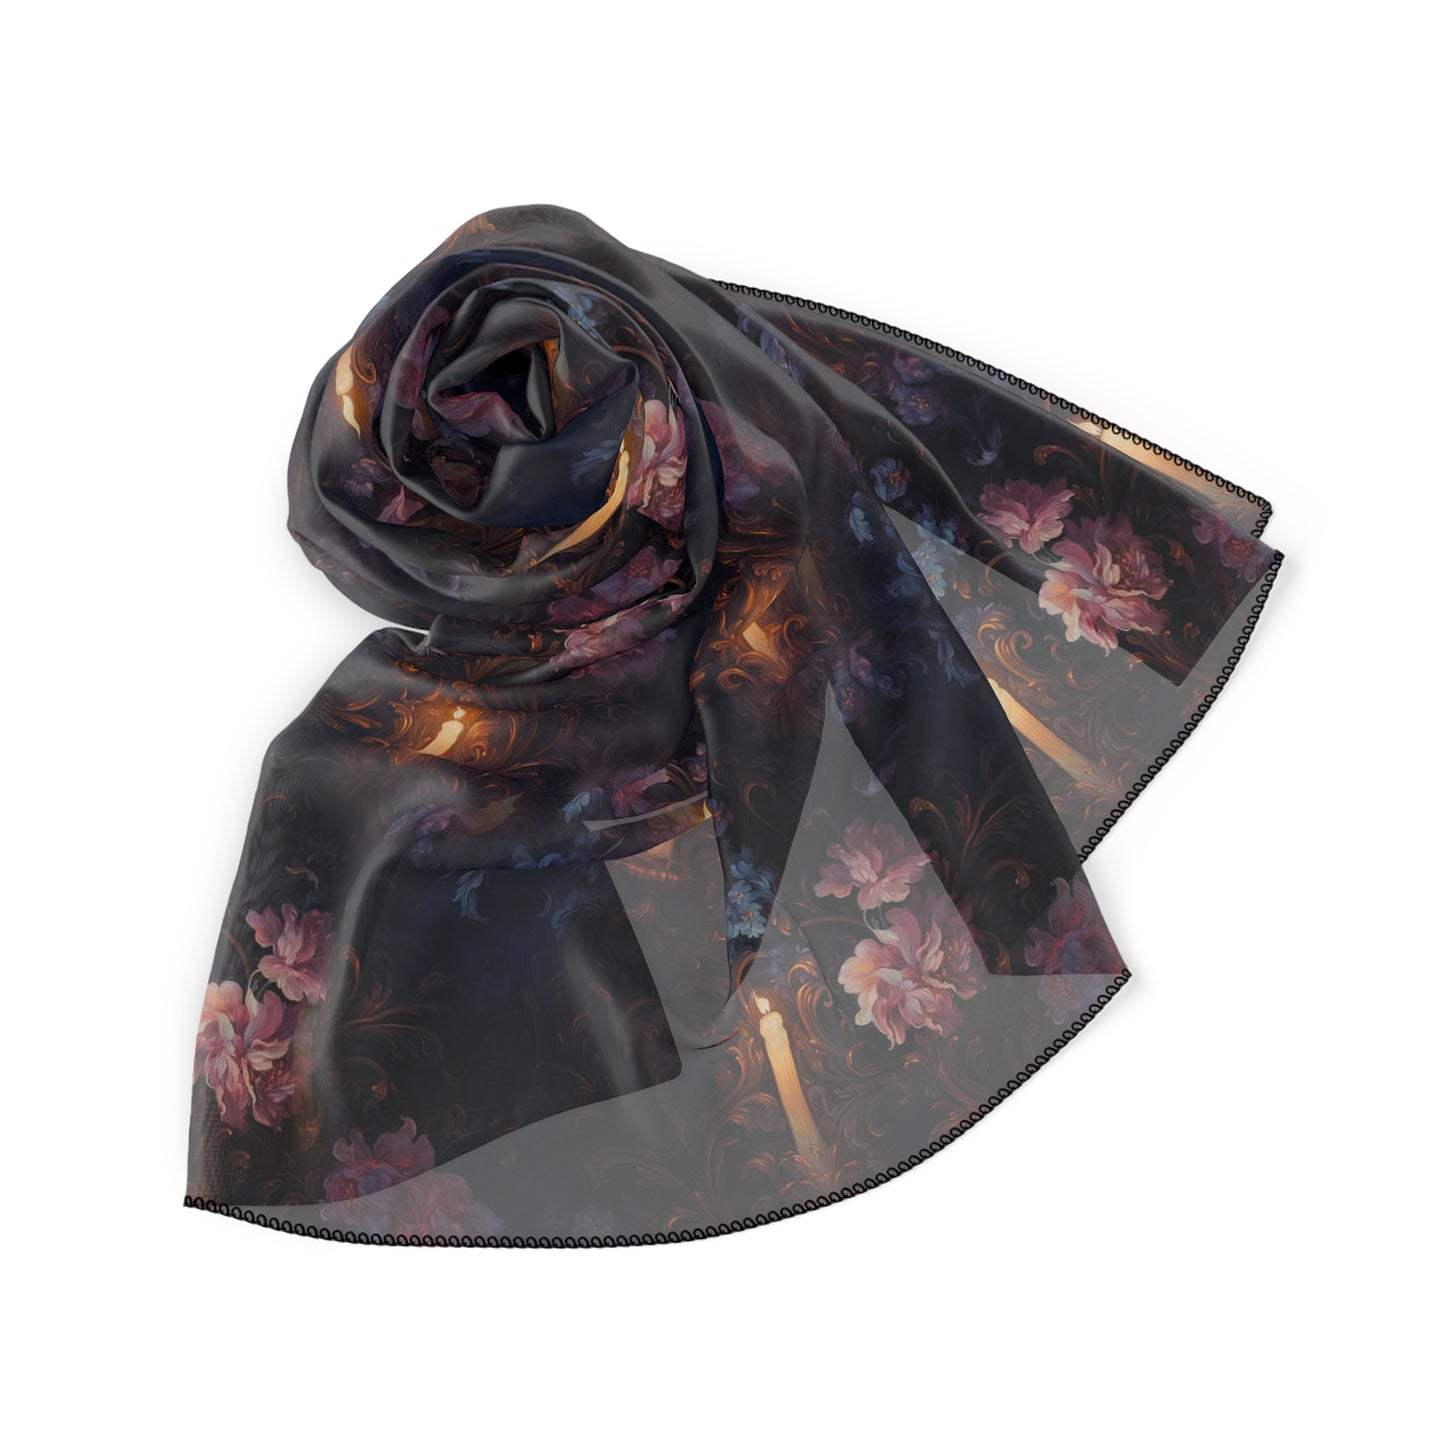 Candles & Flowers Gothic Witches Veil | Witchy Pagan Scarf